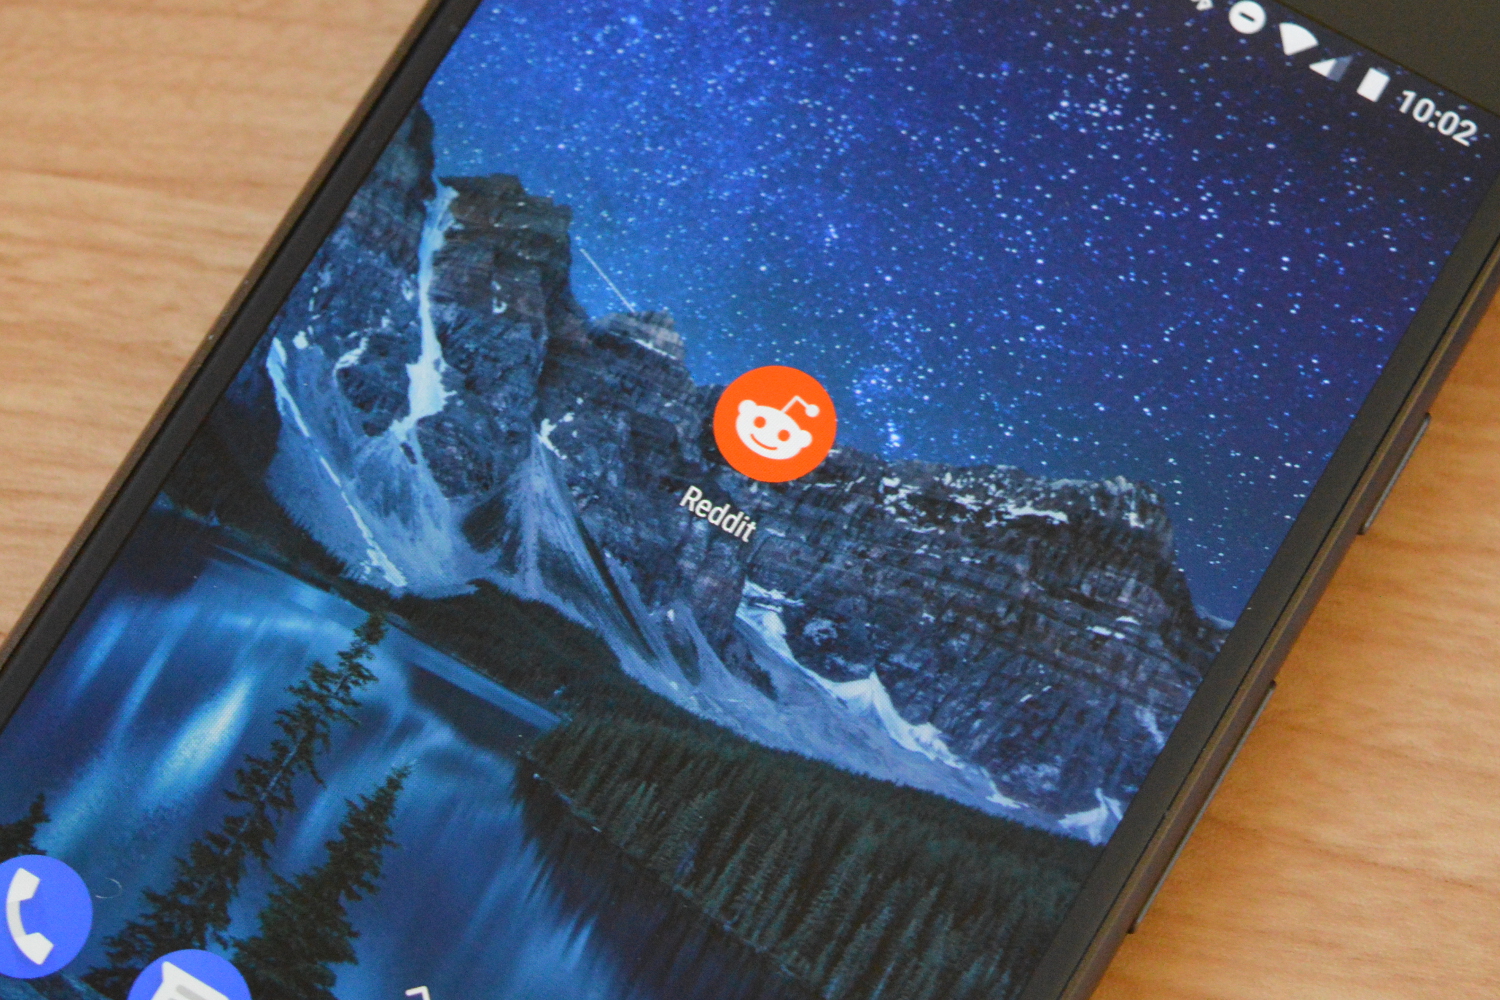 Top 5 Reddit apps: the best way to feed you Reddit need - Phandroid